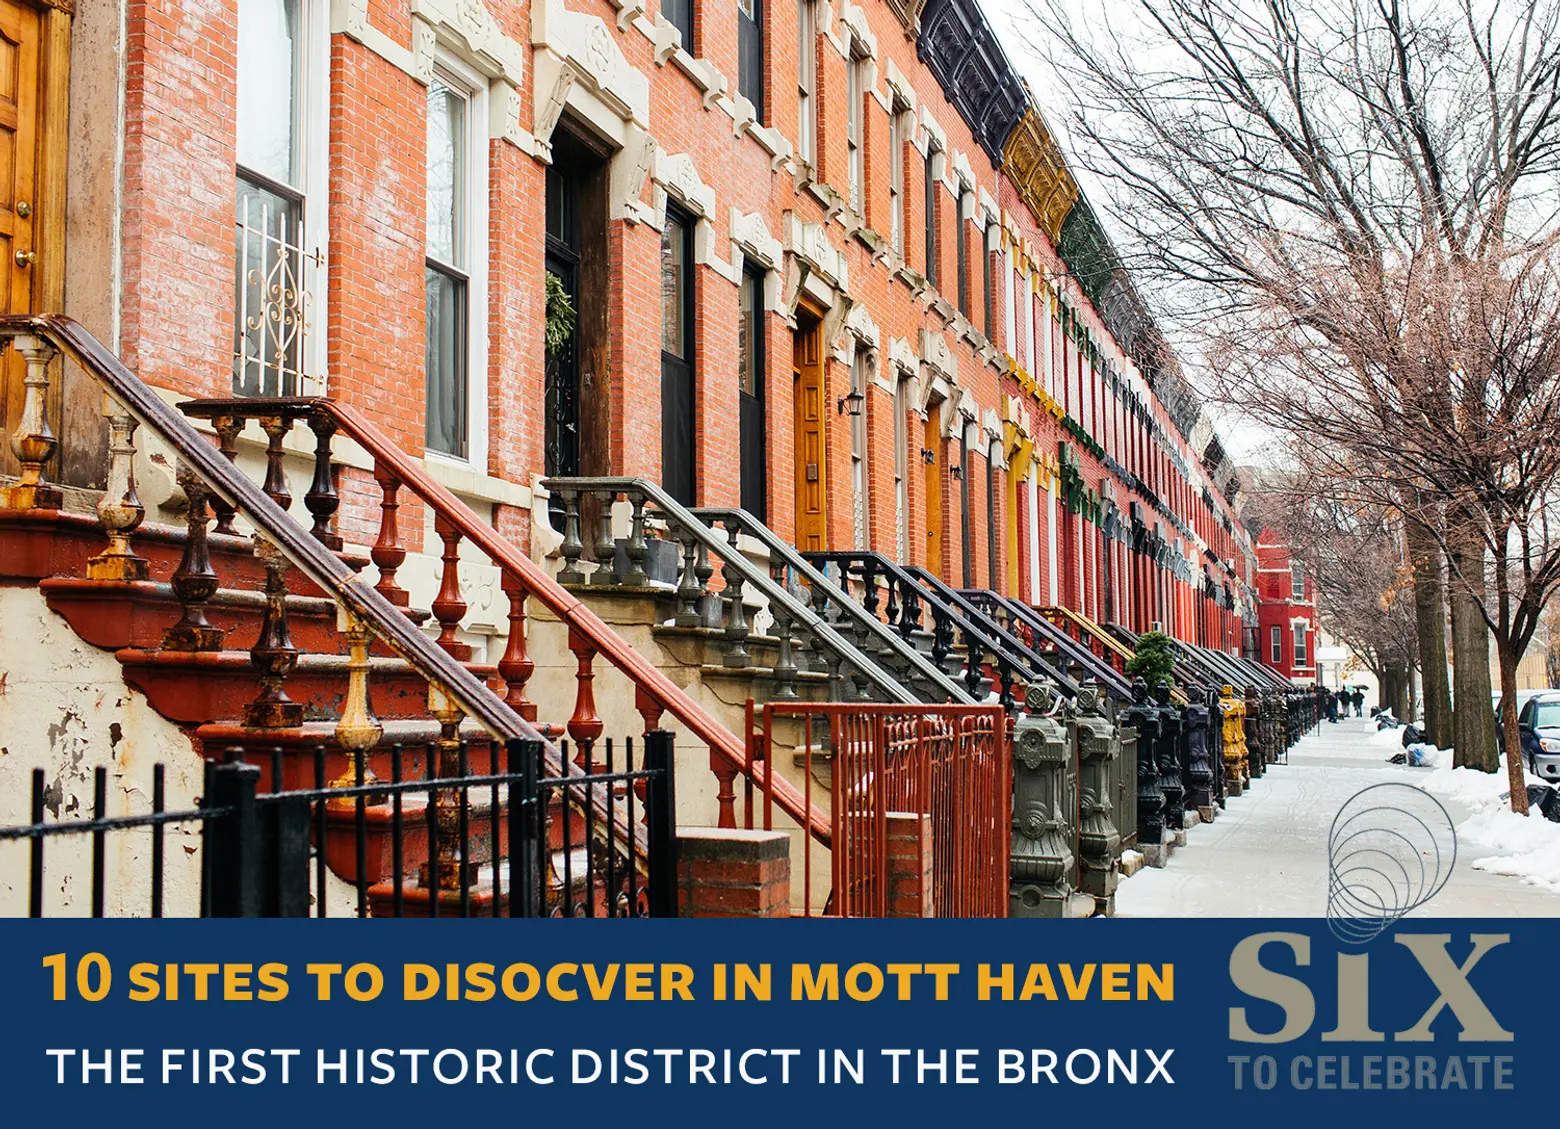 10 historic sites to discover in Mott Haven, the Bronx’s first historic district